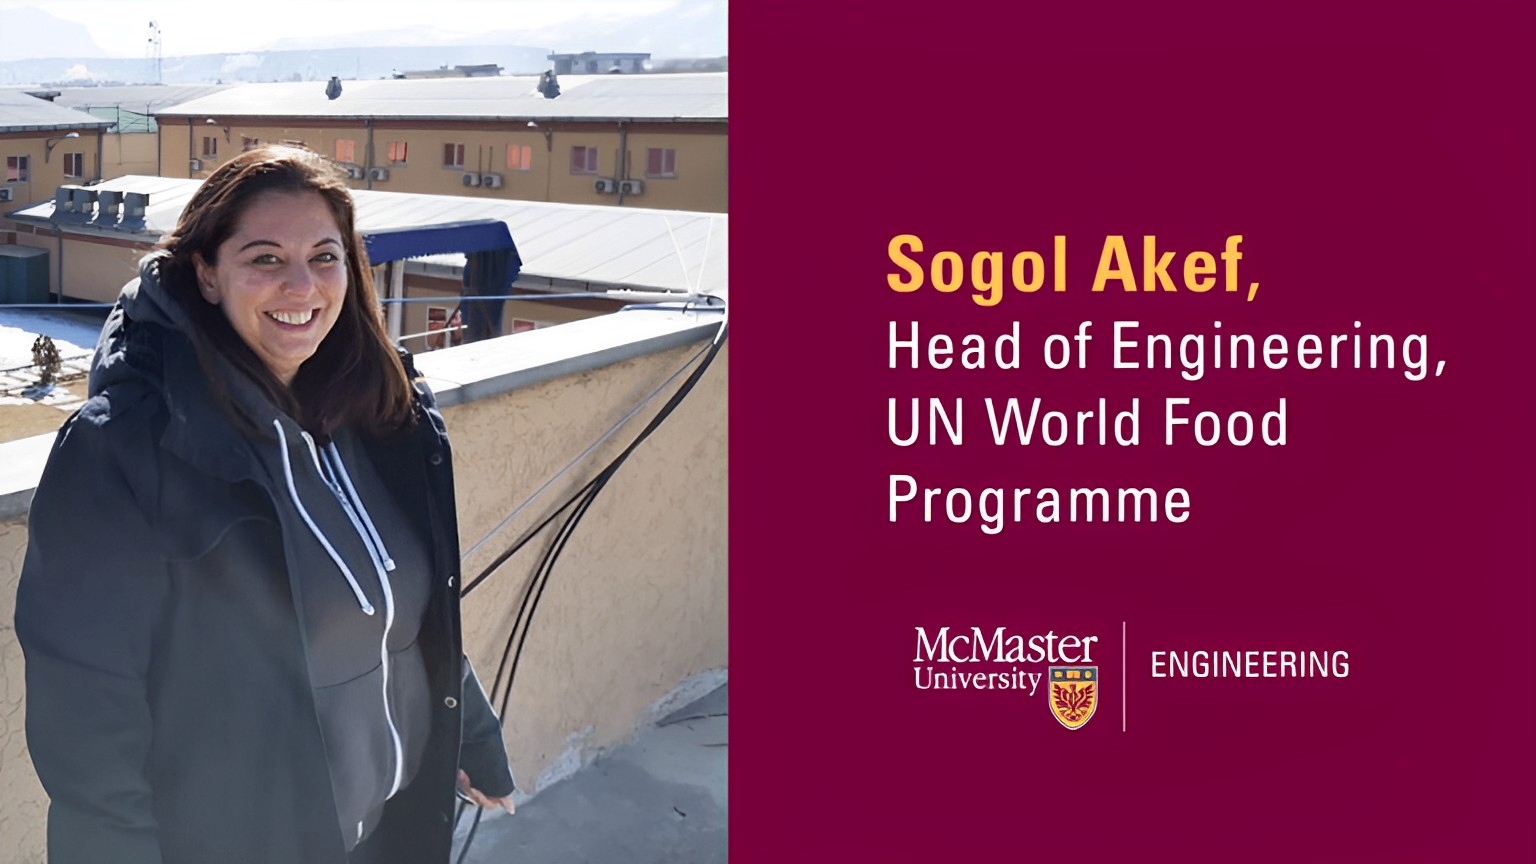 Sogol Akef smiles while wearing a hoodie. The words beside the picture say Sogol Akef, Head of Engineering, UN World Food Programme.